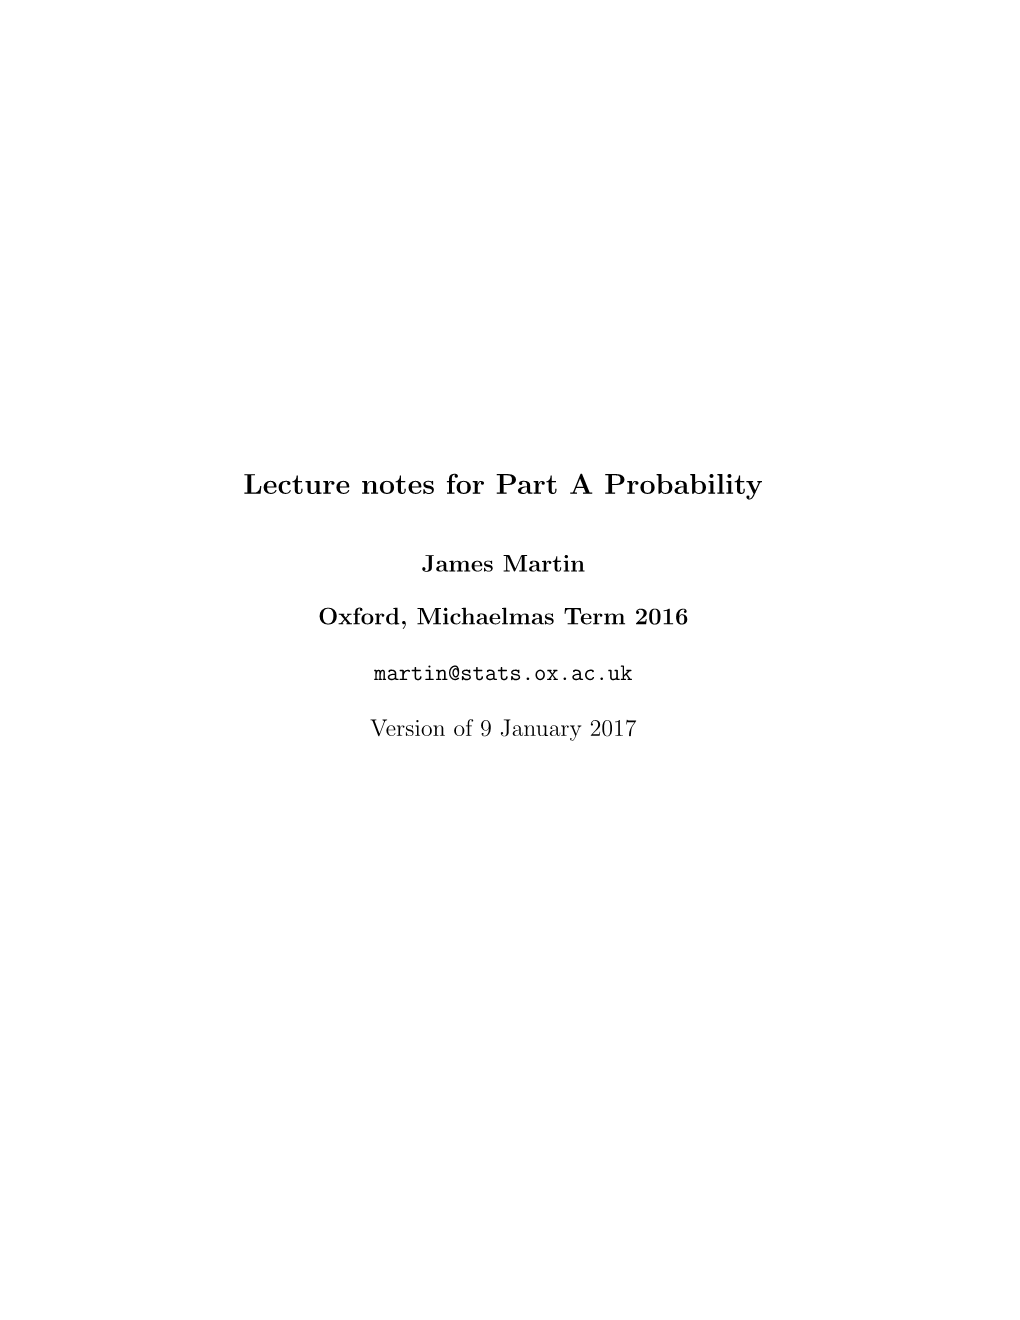 Lecture Notes for Part a Probability